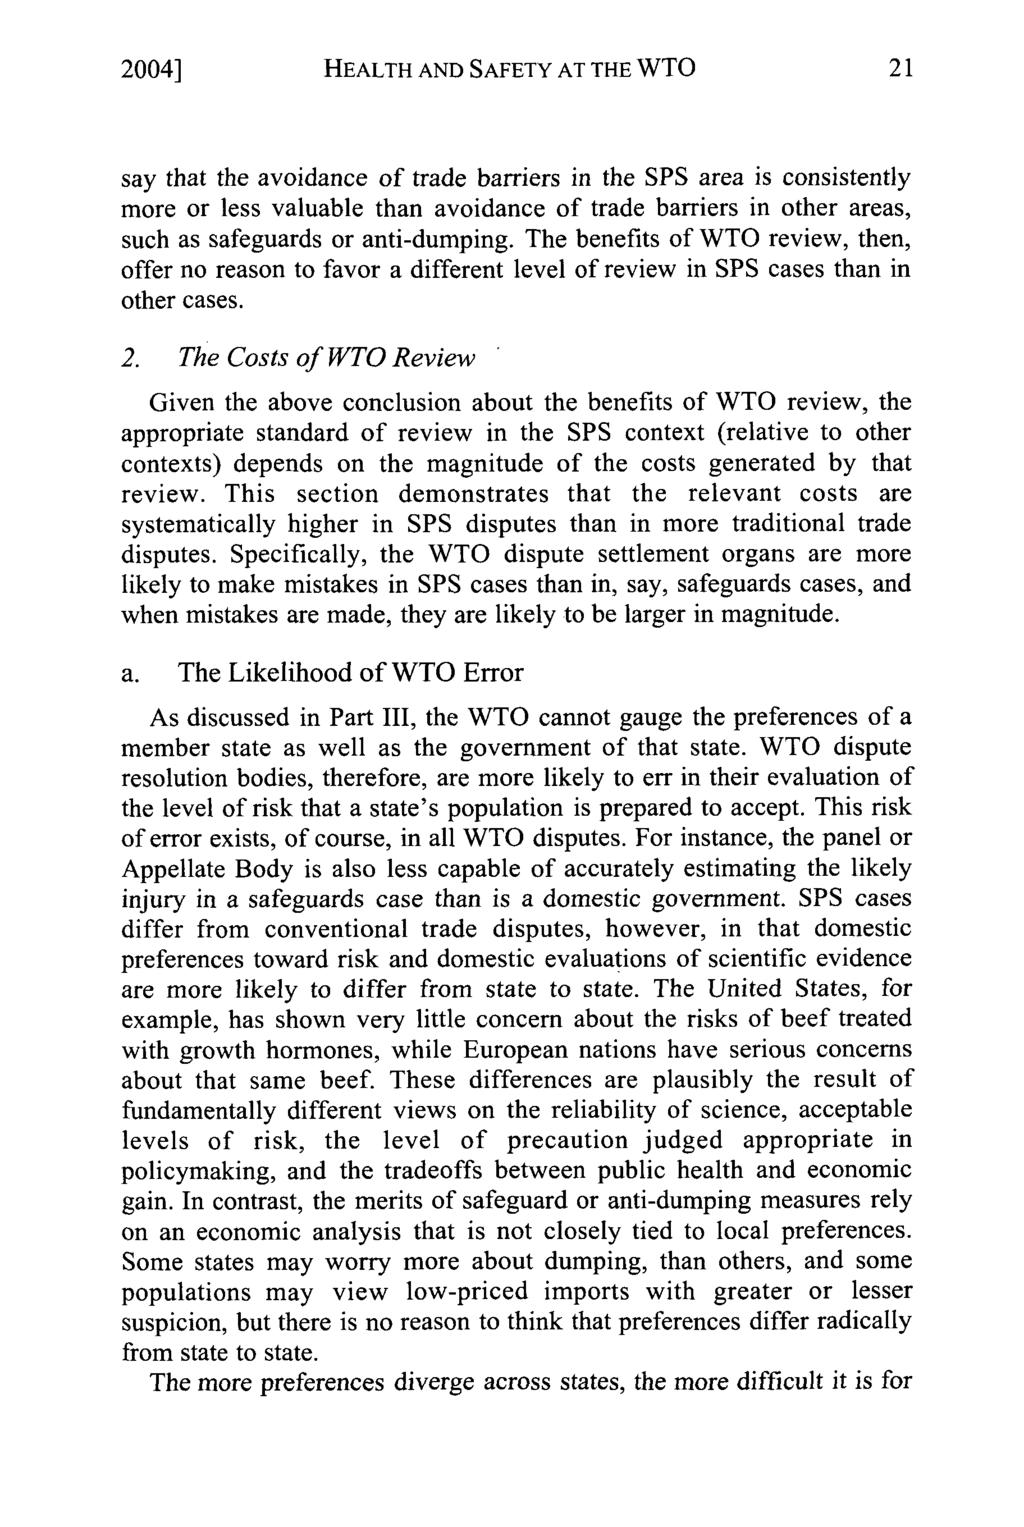 20041 HEALTH AND SAFETY AT THE WTO say that the avoidance of trade barriers in the SPS area is consistently more or less valuable than avoidance of trade barriers in other areas, such as safeguards